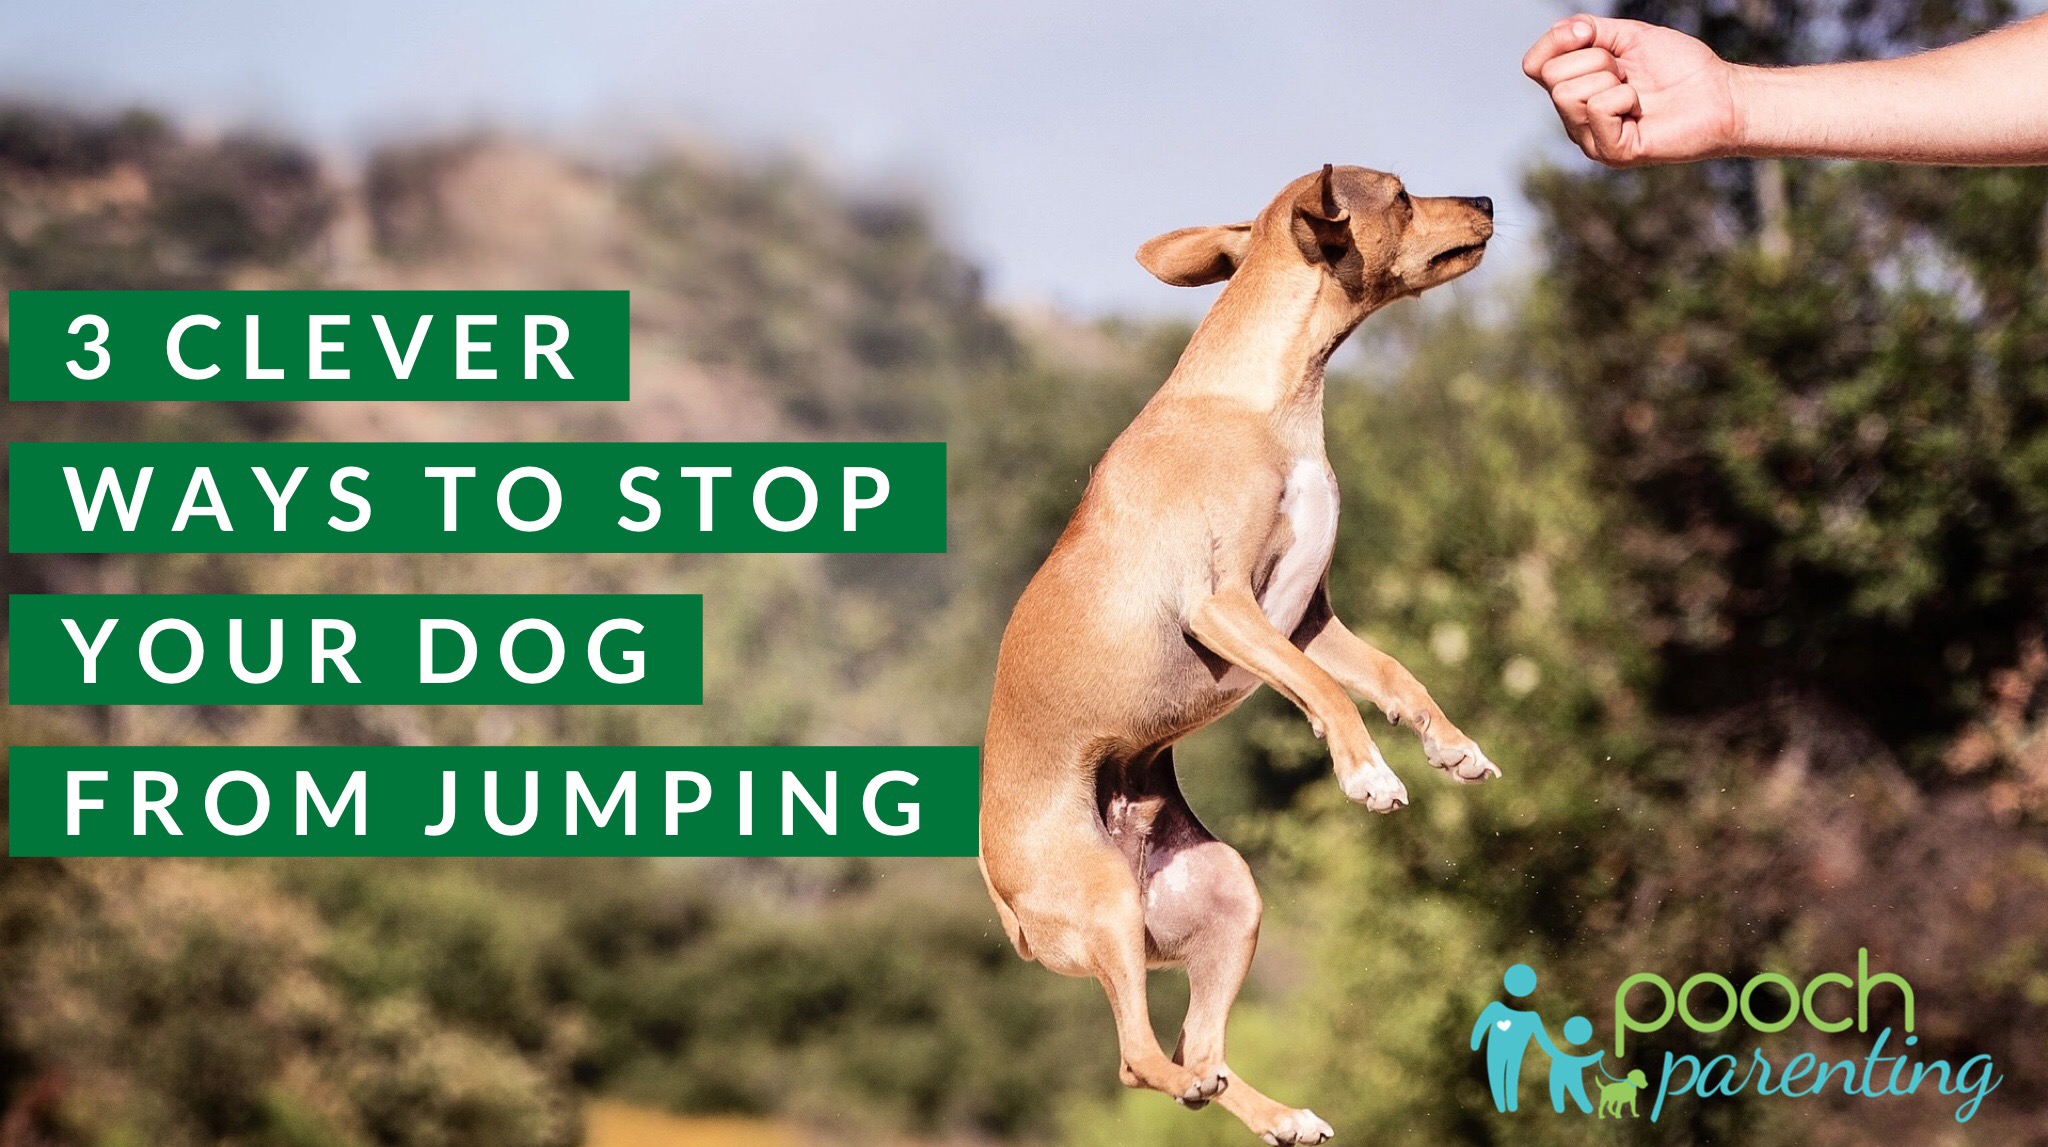 3 Ways to Stop Your Dog from Jumping - Pooch Parenting